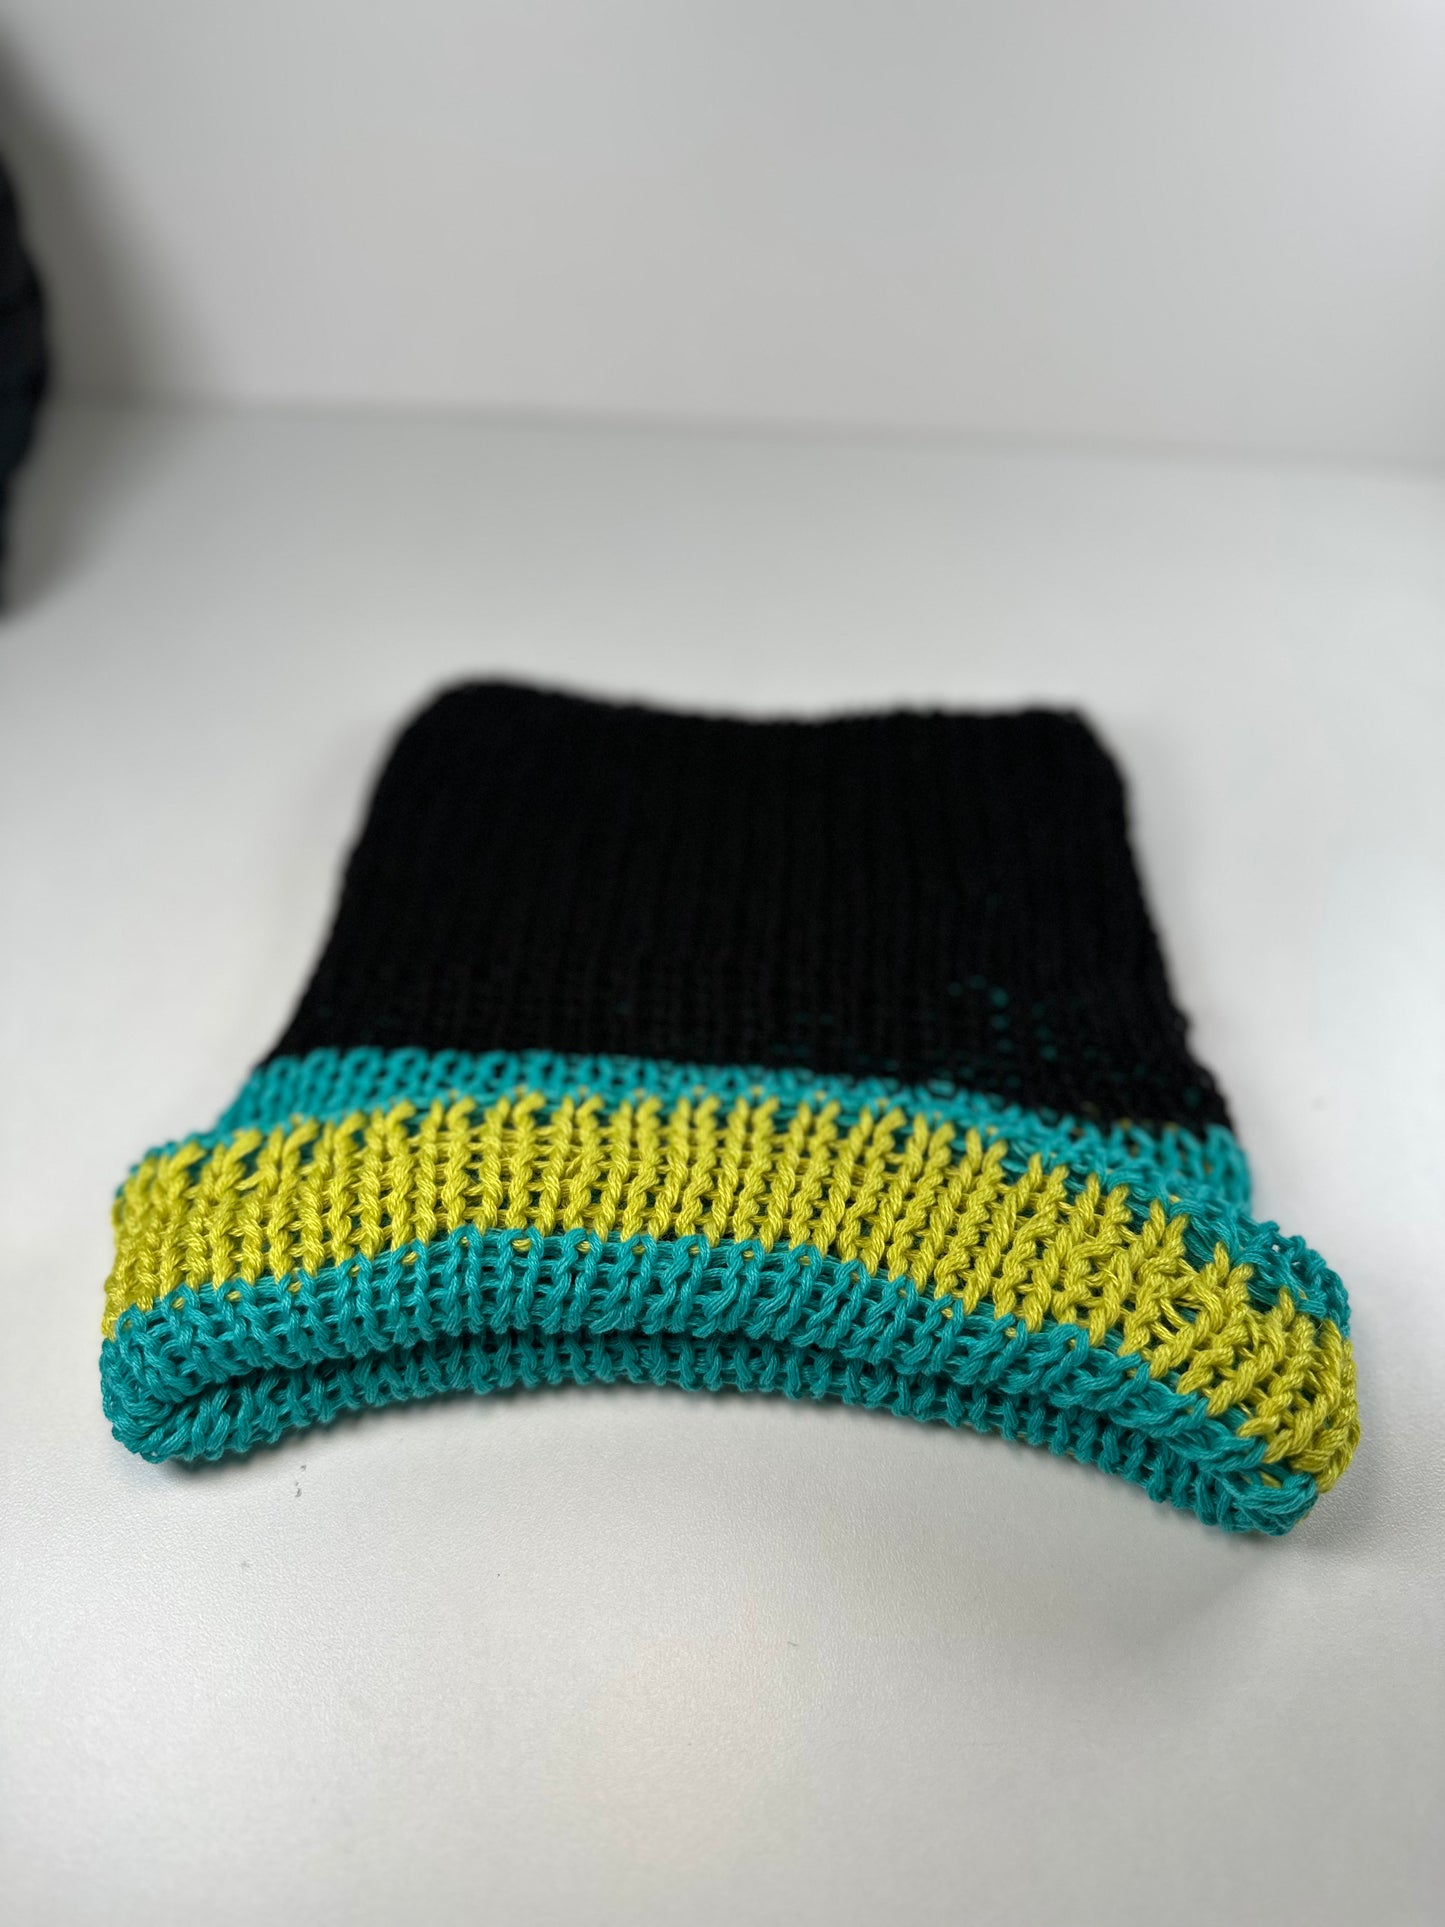 The black, turquoise, and lime green striped beanie